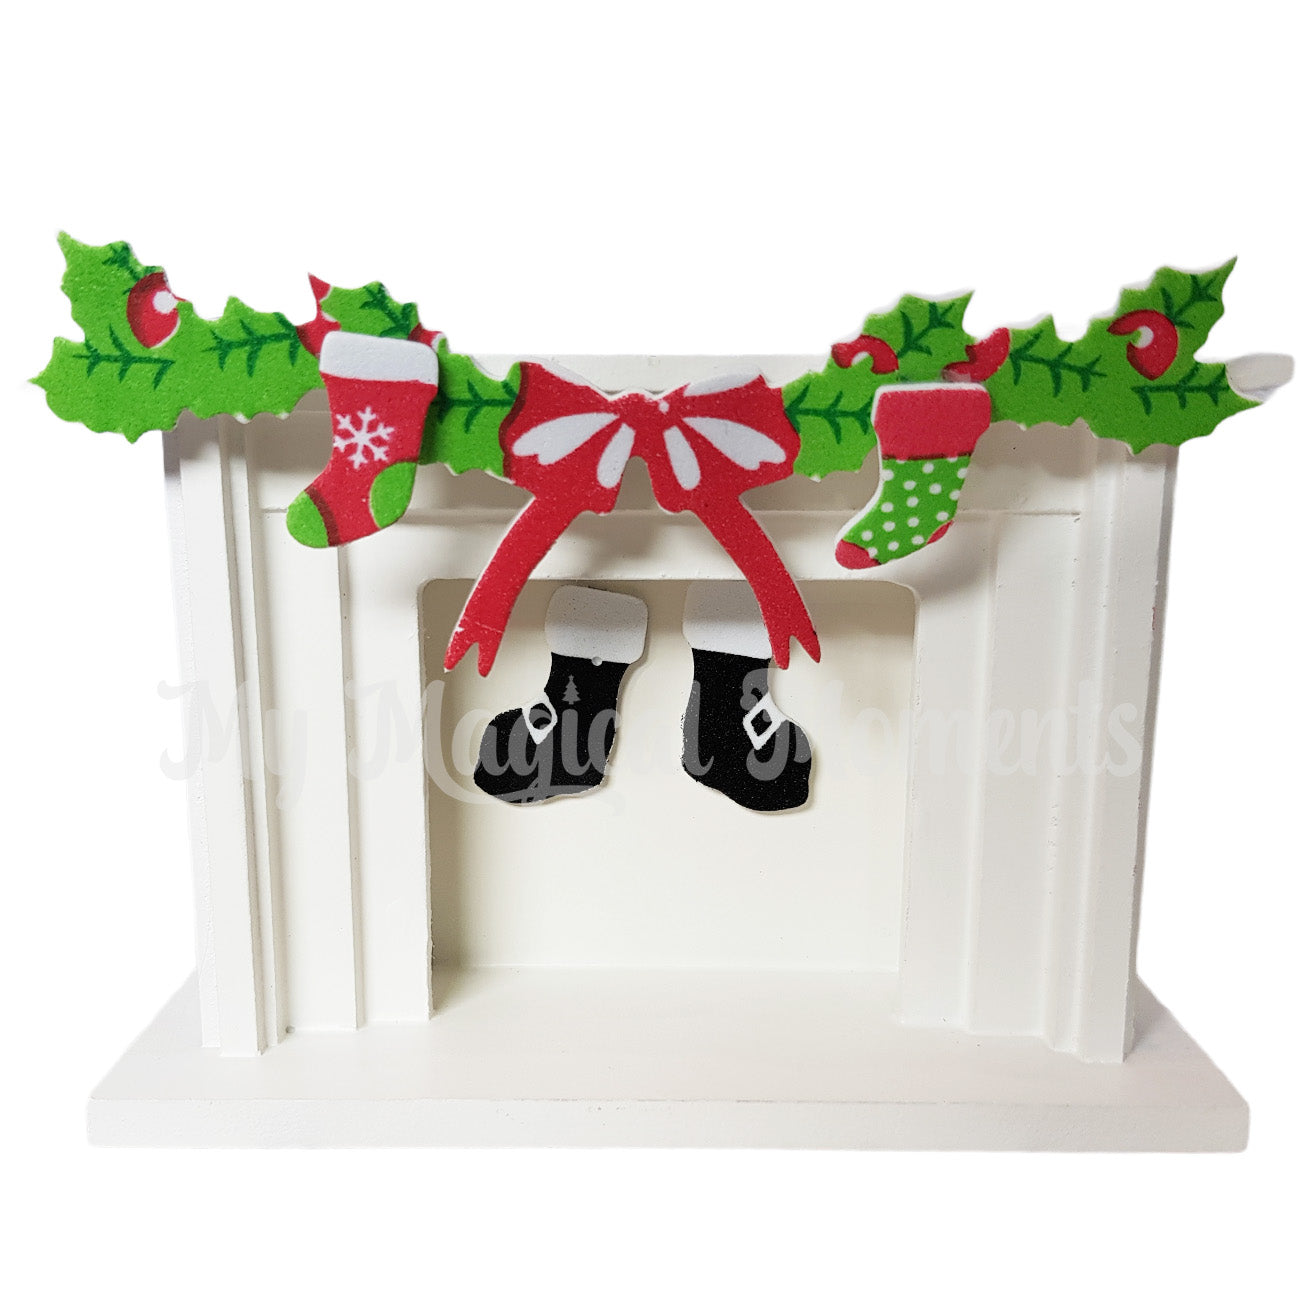 Fireplace decorating kit for elf house. Santa boots, garland and miniature stockings